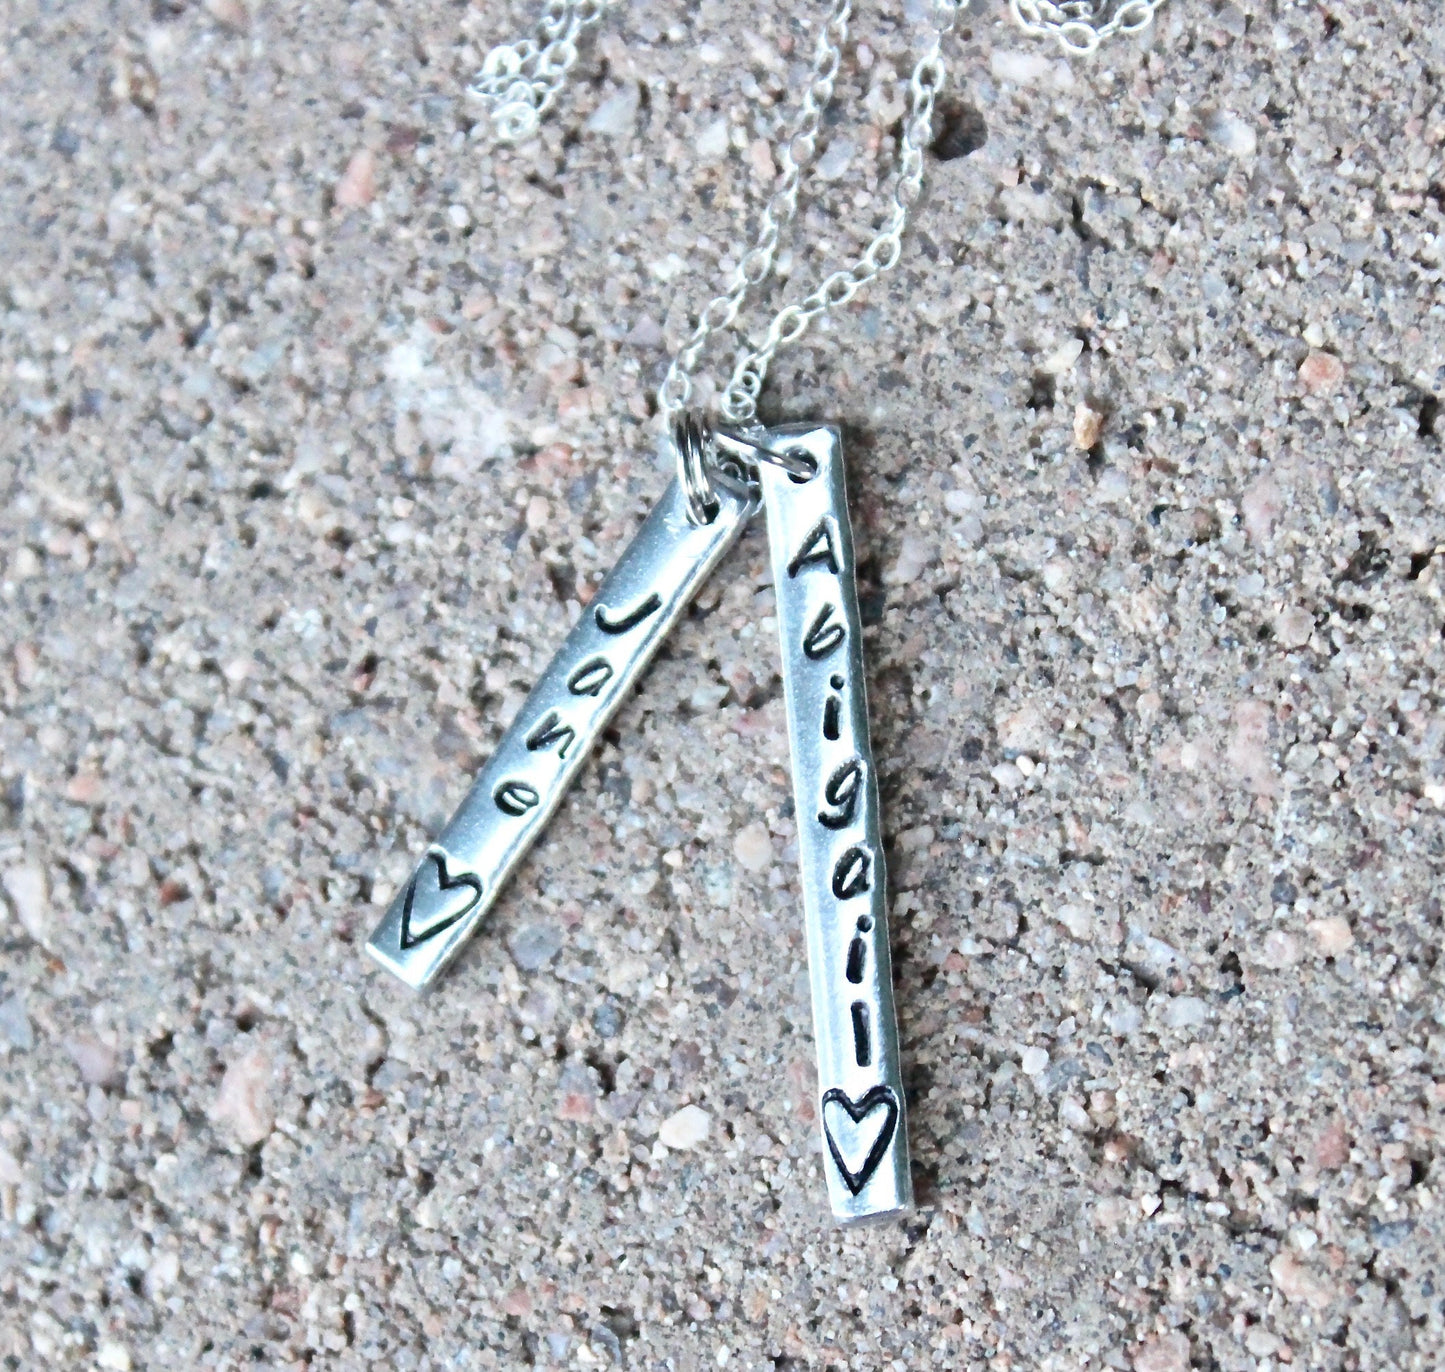 Name Necklace, Sterling Silver Chain, Aluminum Charms